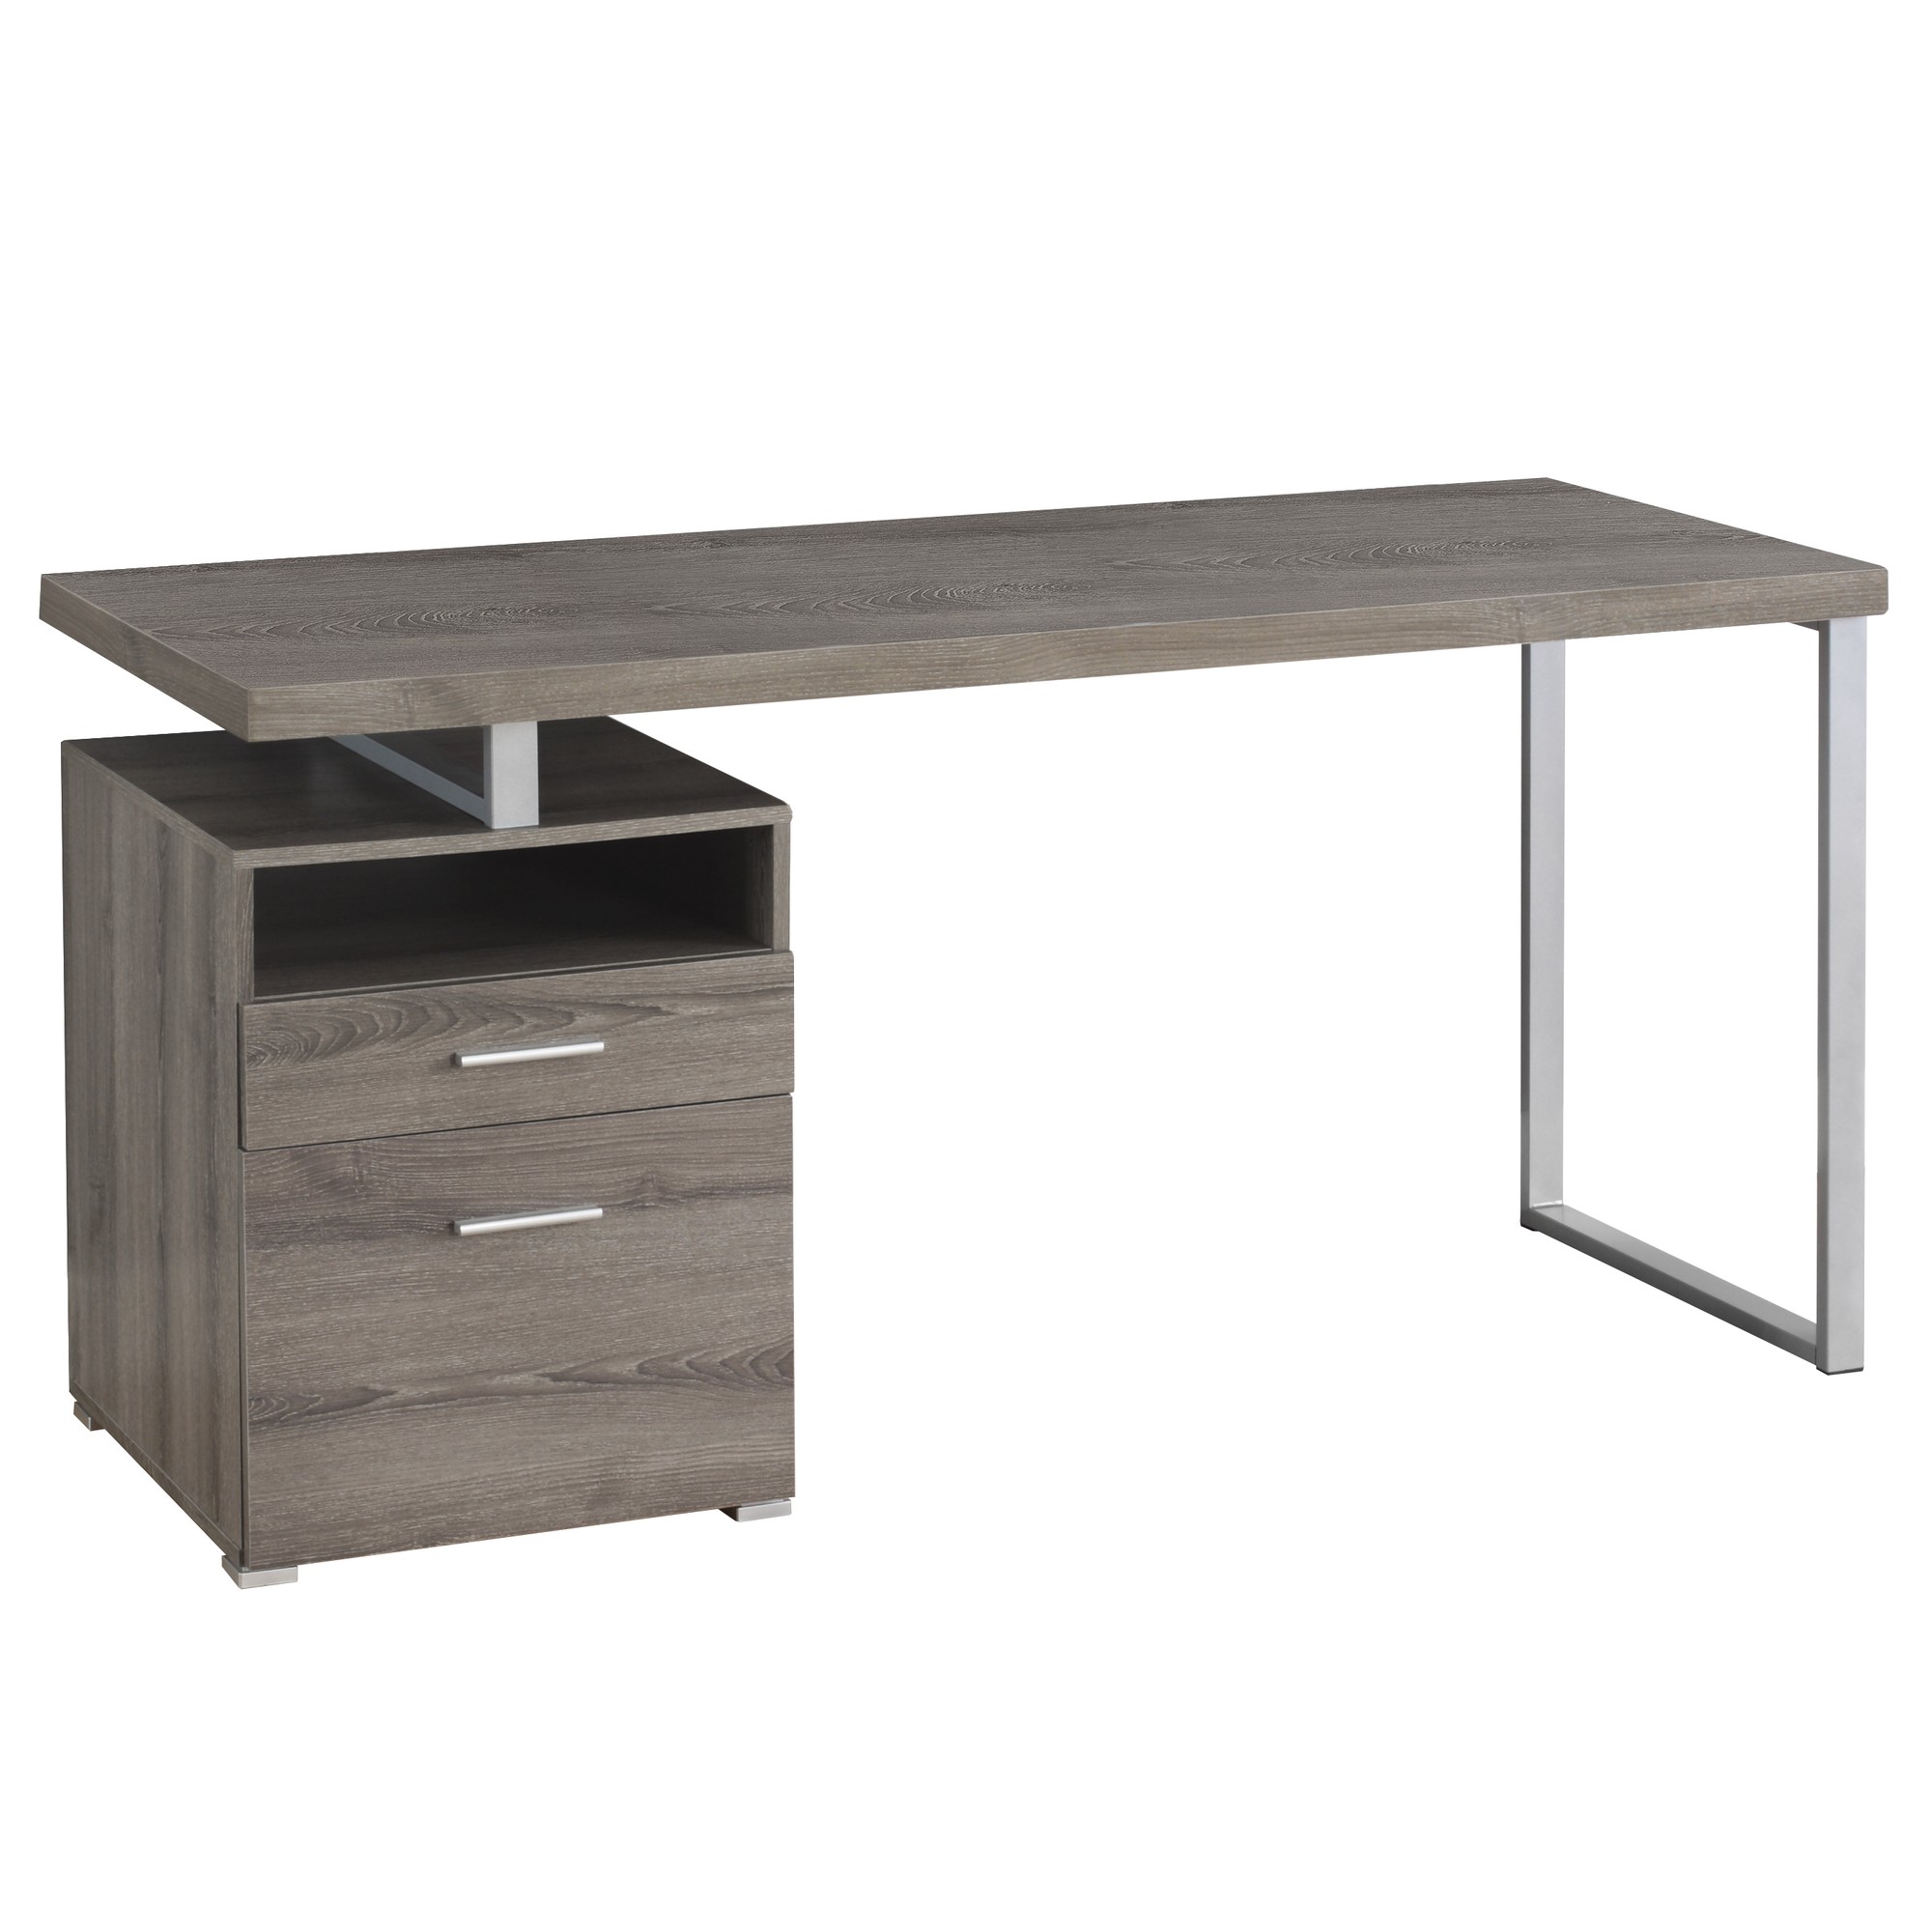 23.75" x 60" x 30" Dark Taupe Silver Particle Board Hollow Core Metal Computer Desk